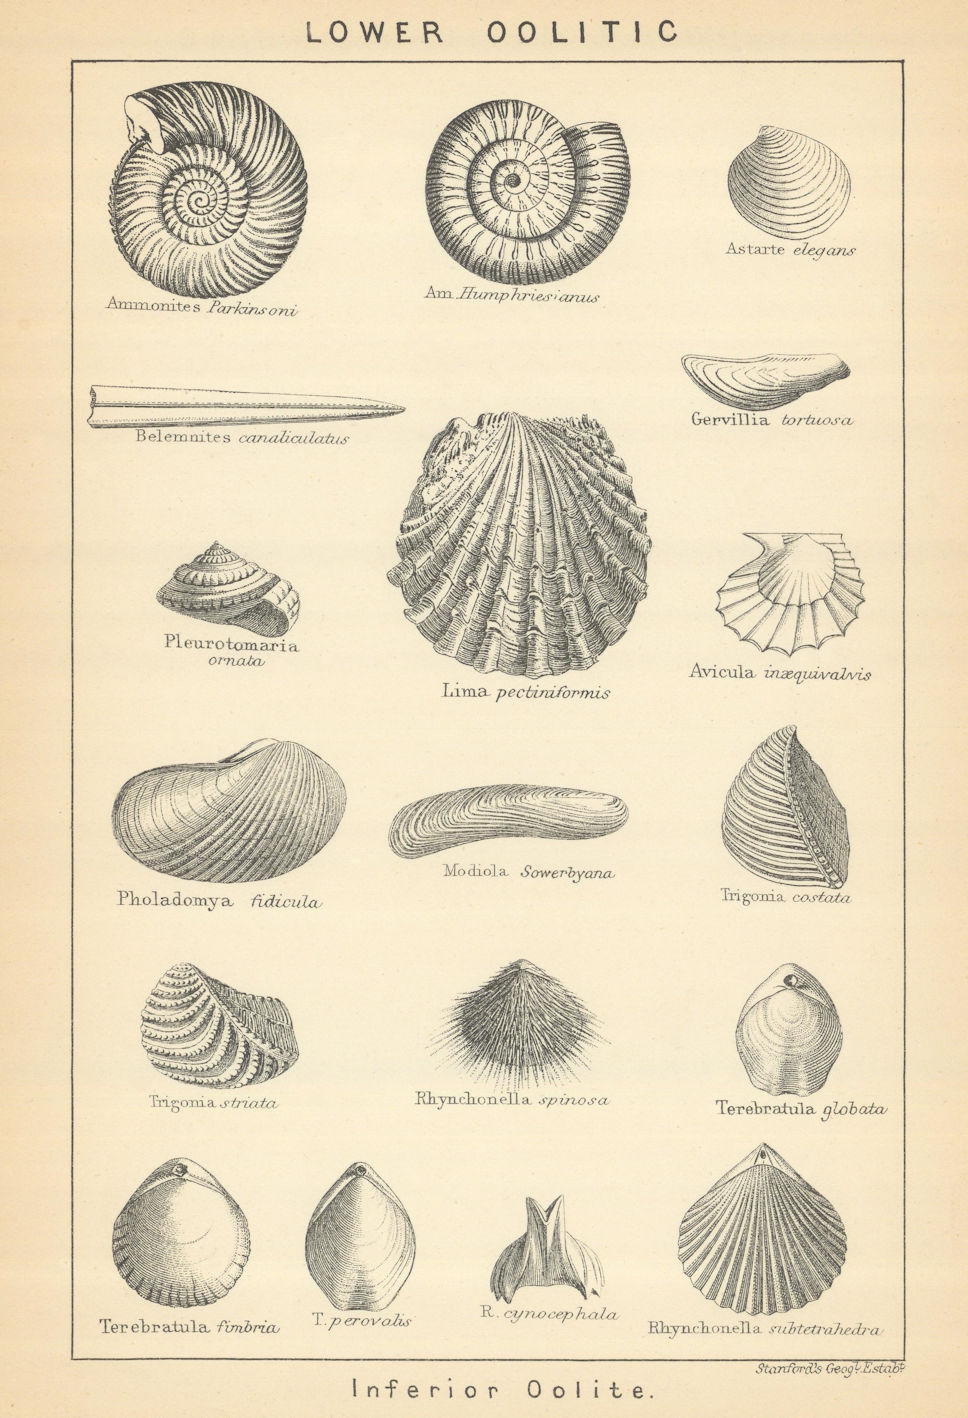 Associate Product BRITISH FOSSILS. Lower Oolitic - Inferior Oolite. STANFORD 1904 old print